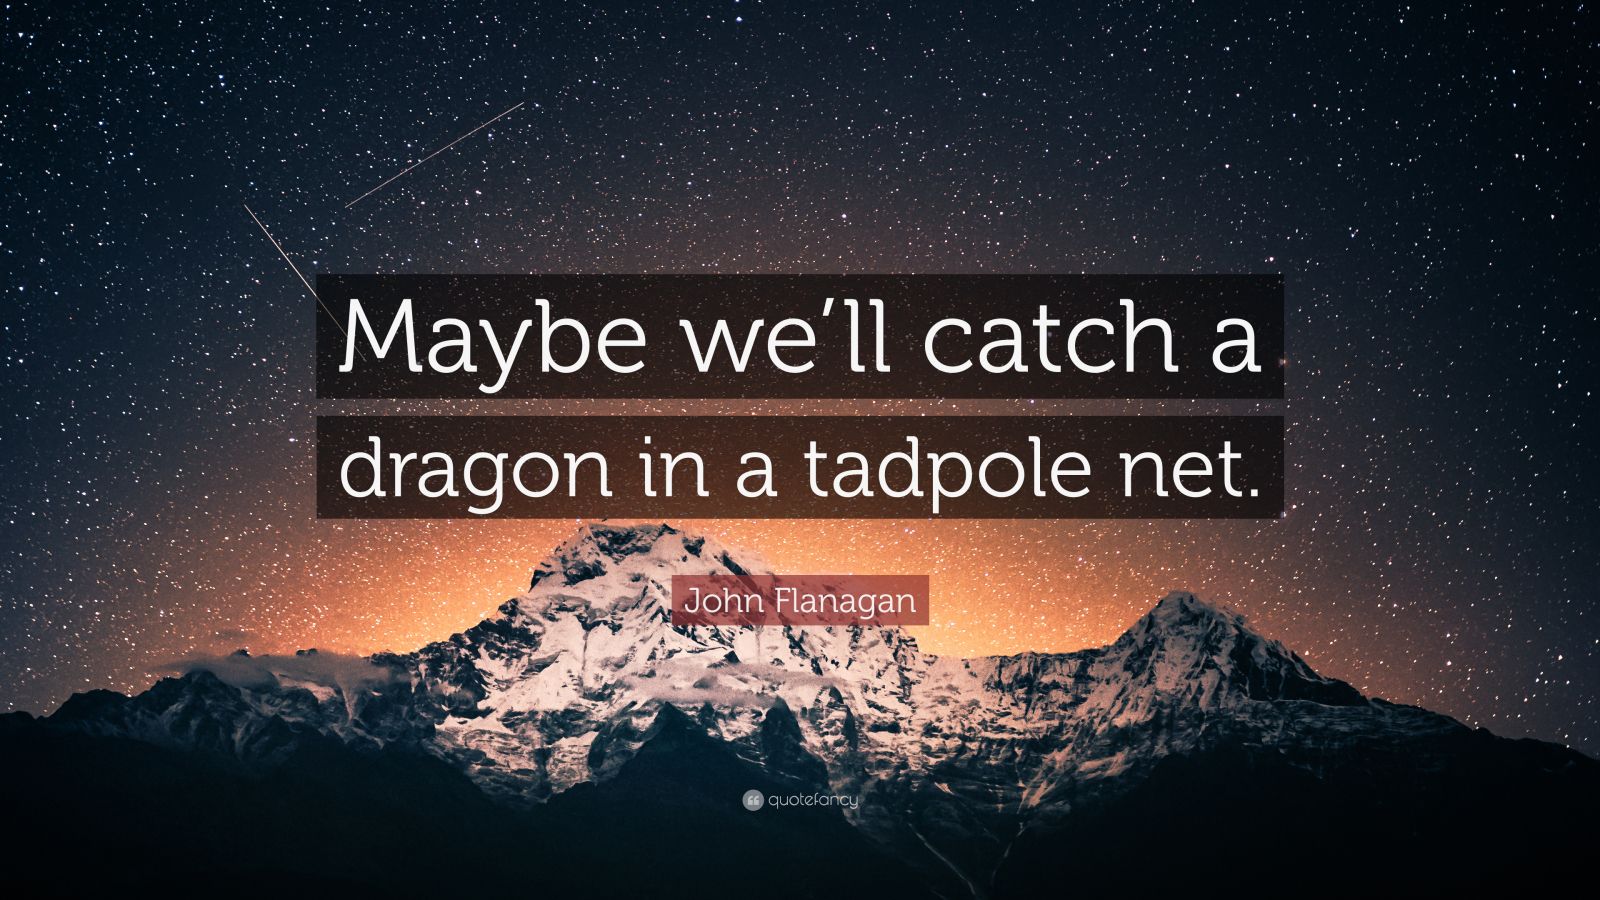 John Flanagan Quote: “Maybe we'll catch a dragon in a tadpole net.”